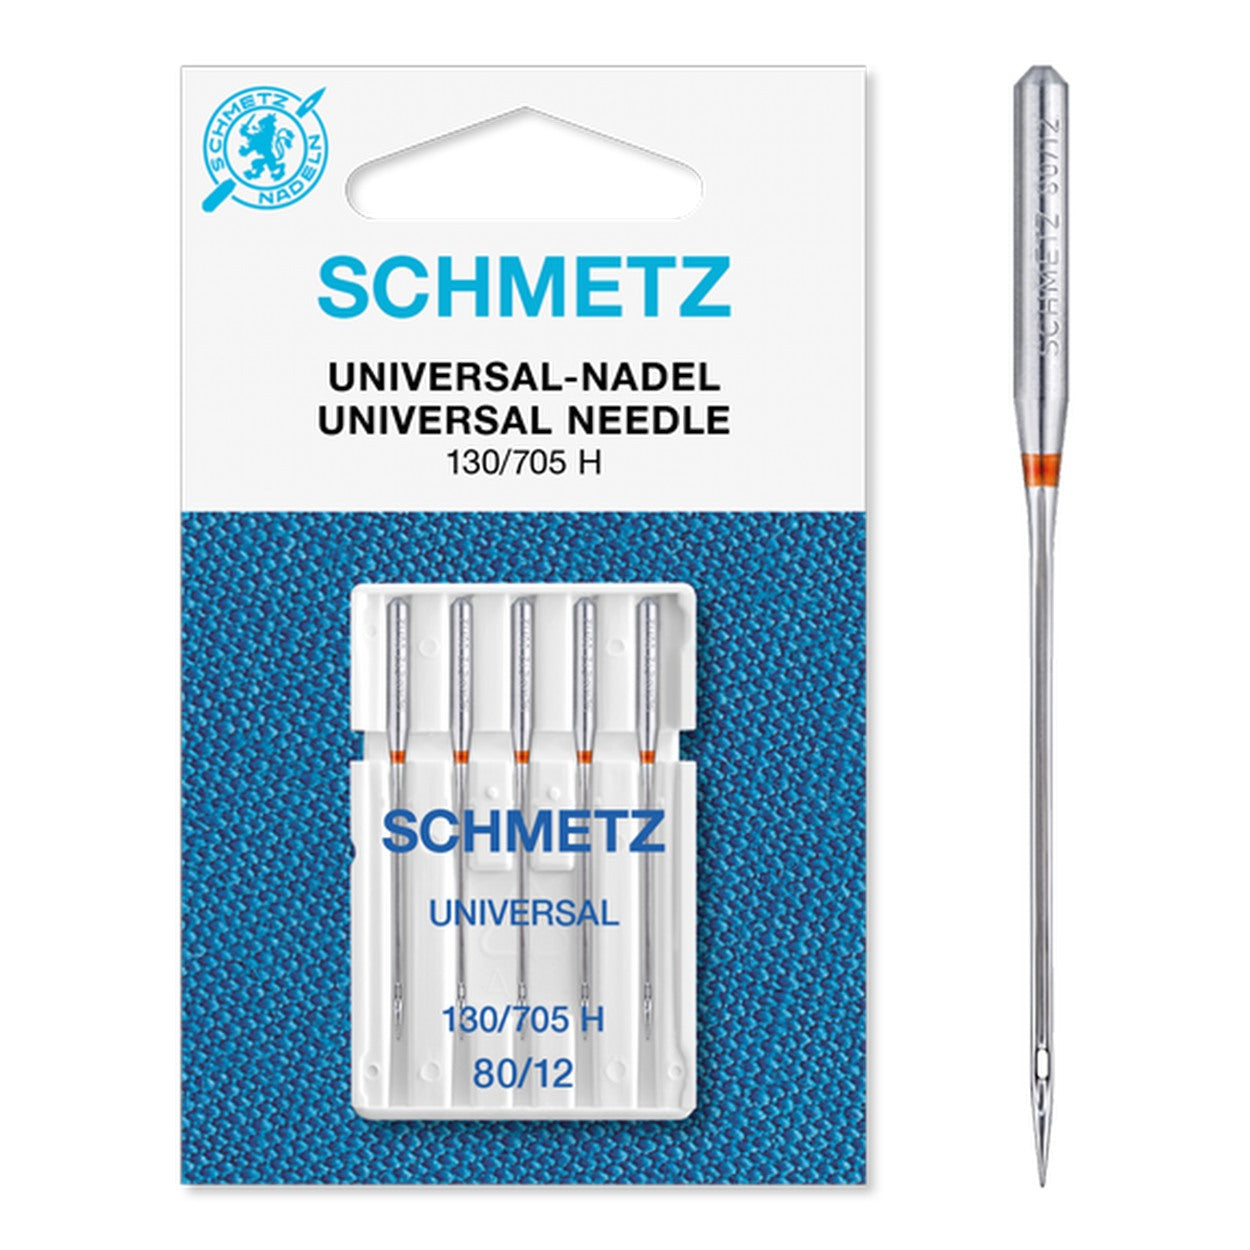 Schmetz Universal Sewing Machine Needles | Packs of 5 from Jaycotts Sewing Supplies